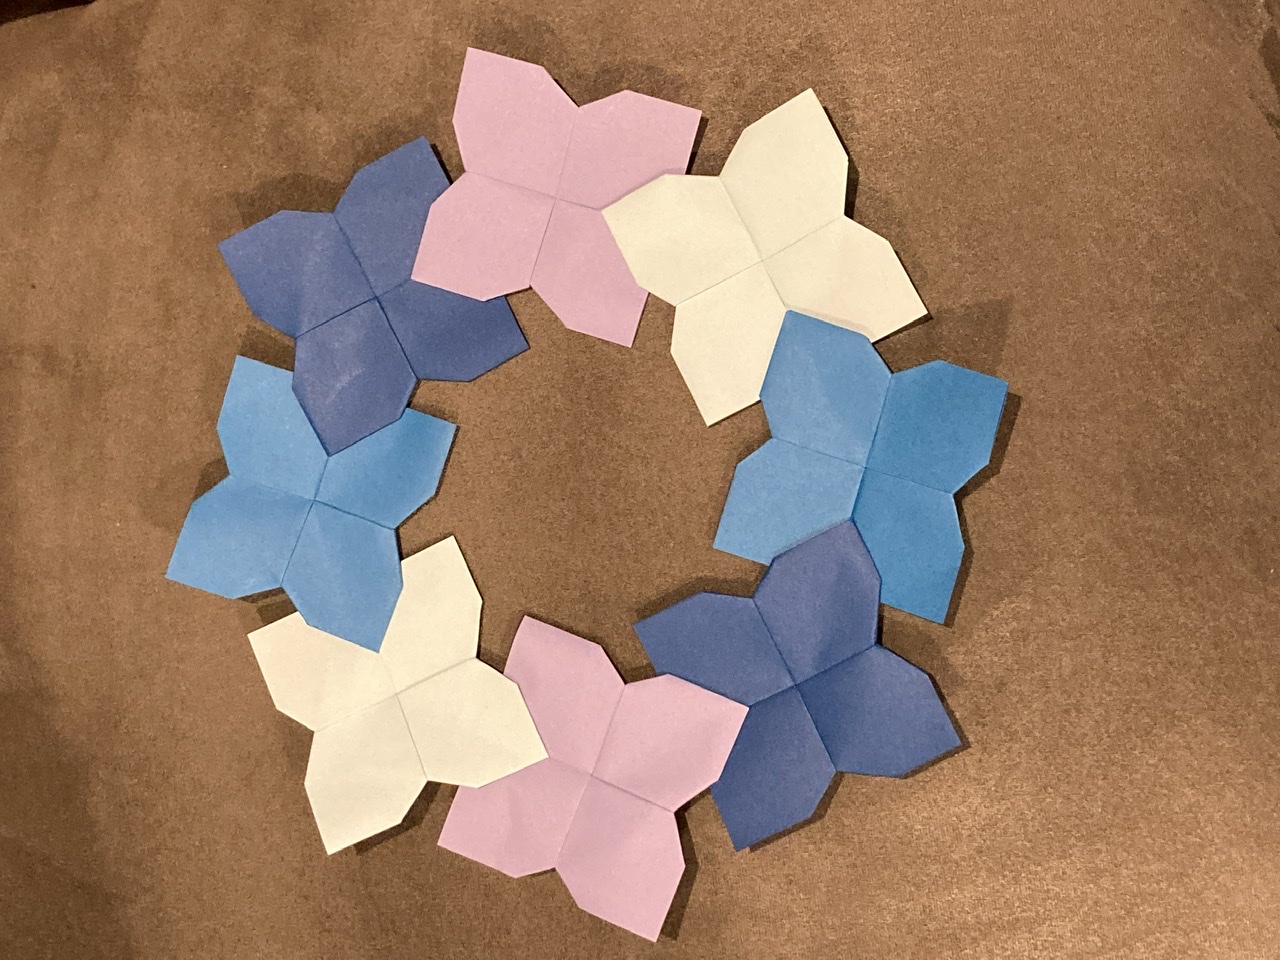 2022/05/29(Sun) 14:16「Hydrangea Flowers Wreath」Janet Yelle
（創作者 Author：Noriko Nagata,　製作者 Folder：Janet Yelle,　出典 Source：Beautiful Origami Paper Wreaths book）
 Made from six inch squares of Tant in shades of blue